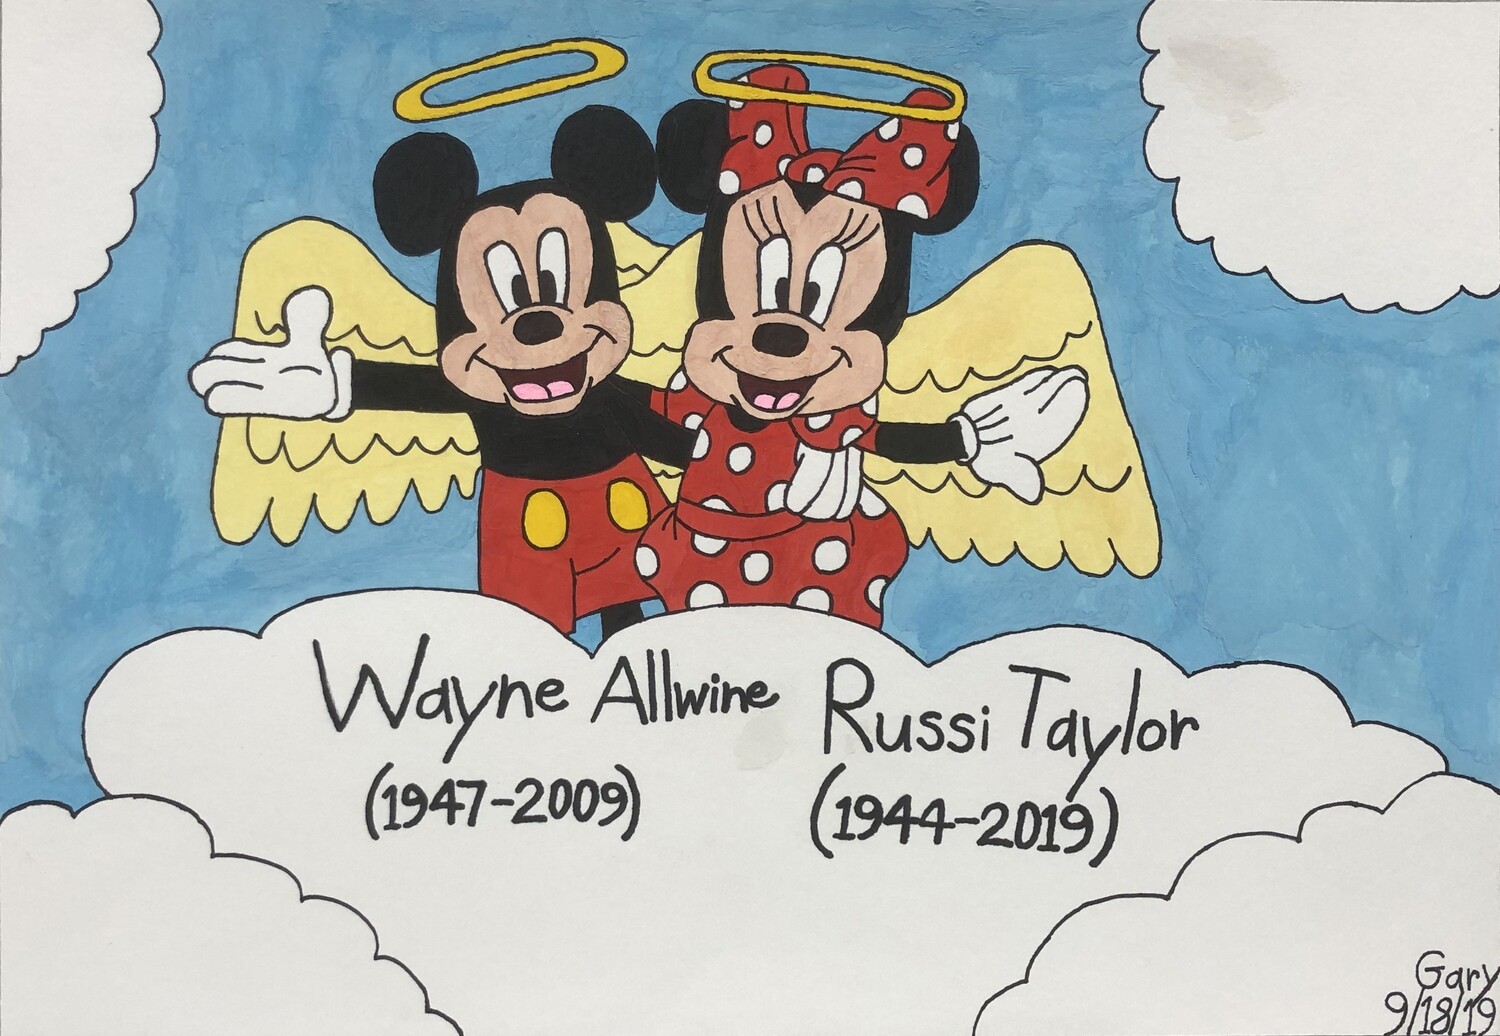 A Tribute to Wayne Allwine and Russi Taylor